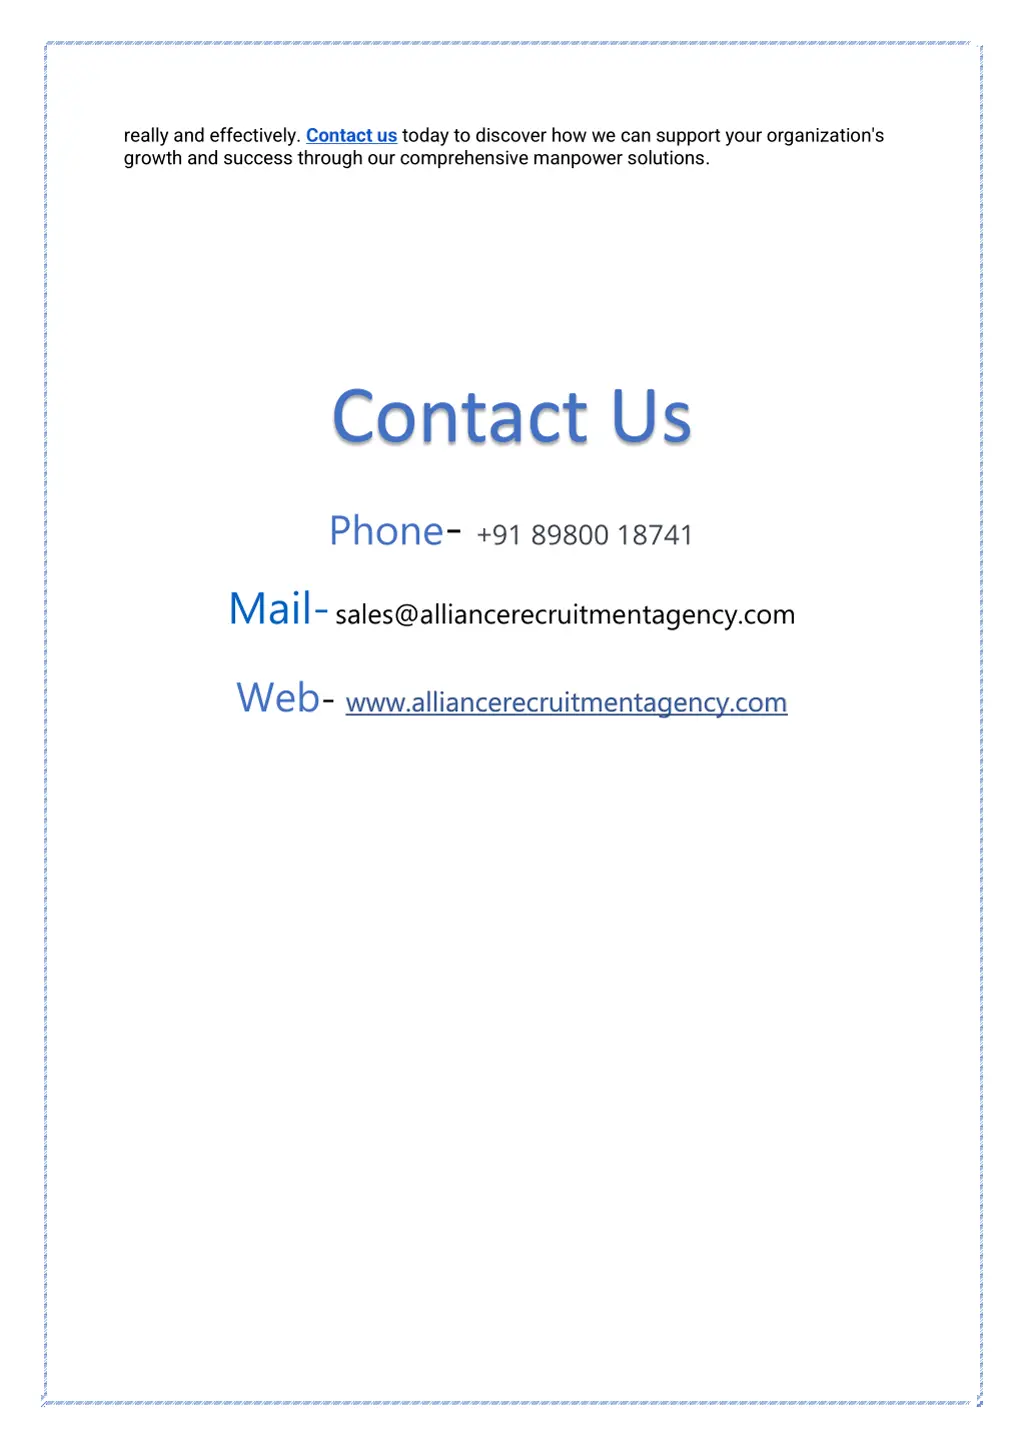 really and effectively contact us today